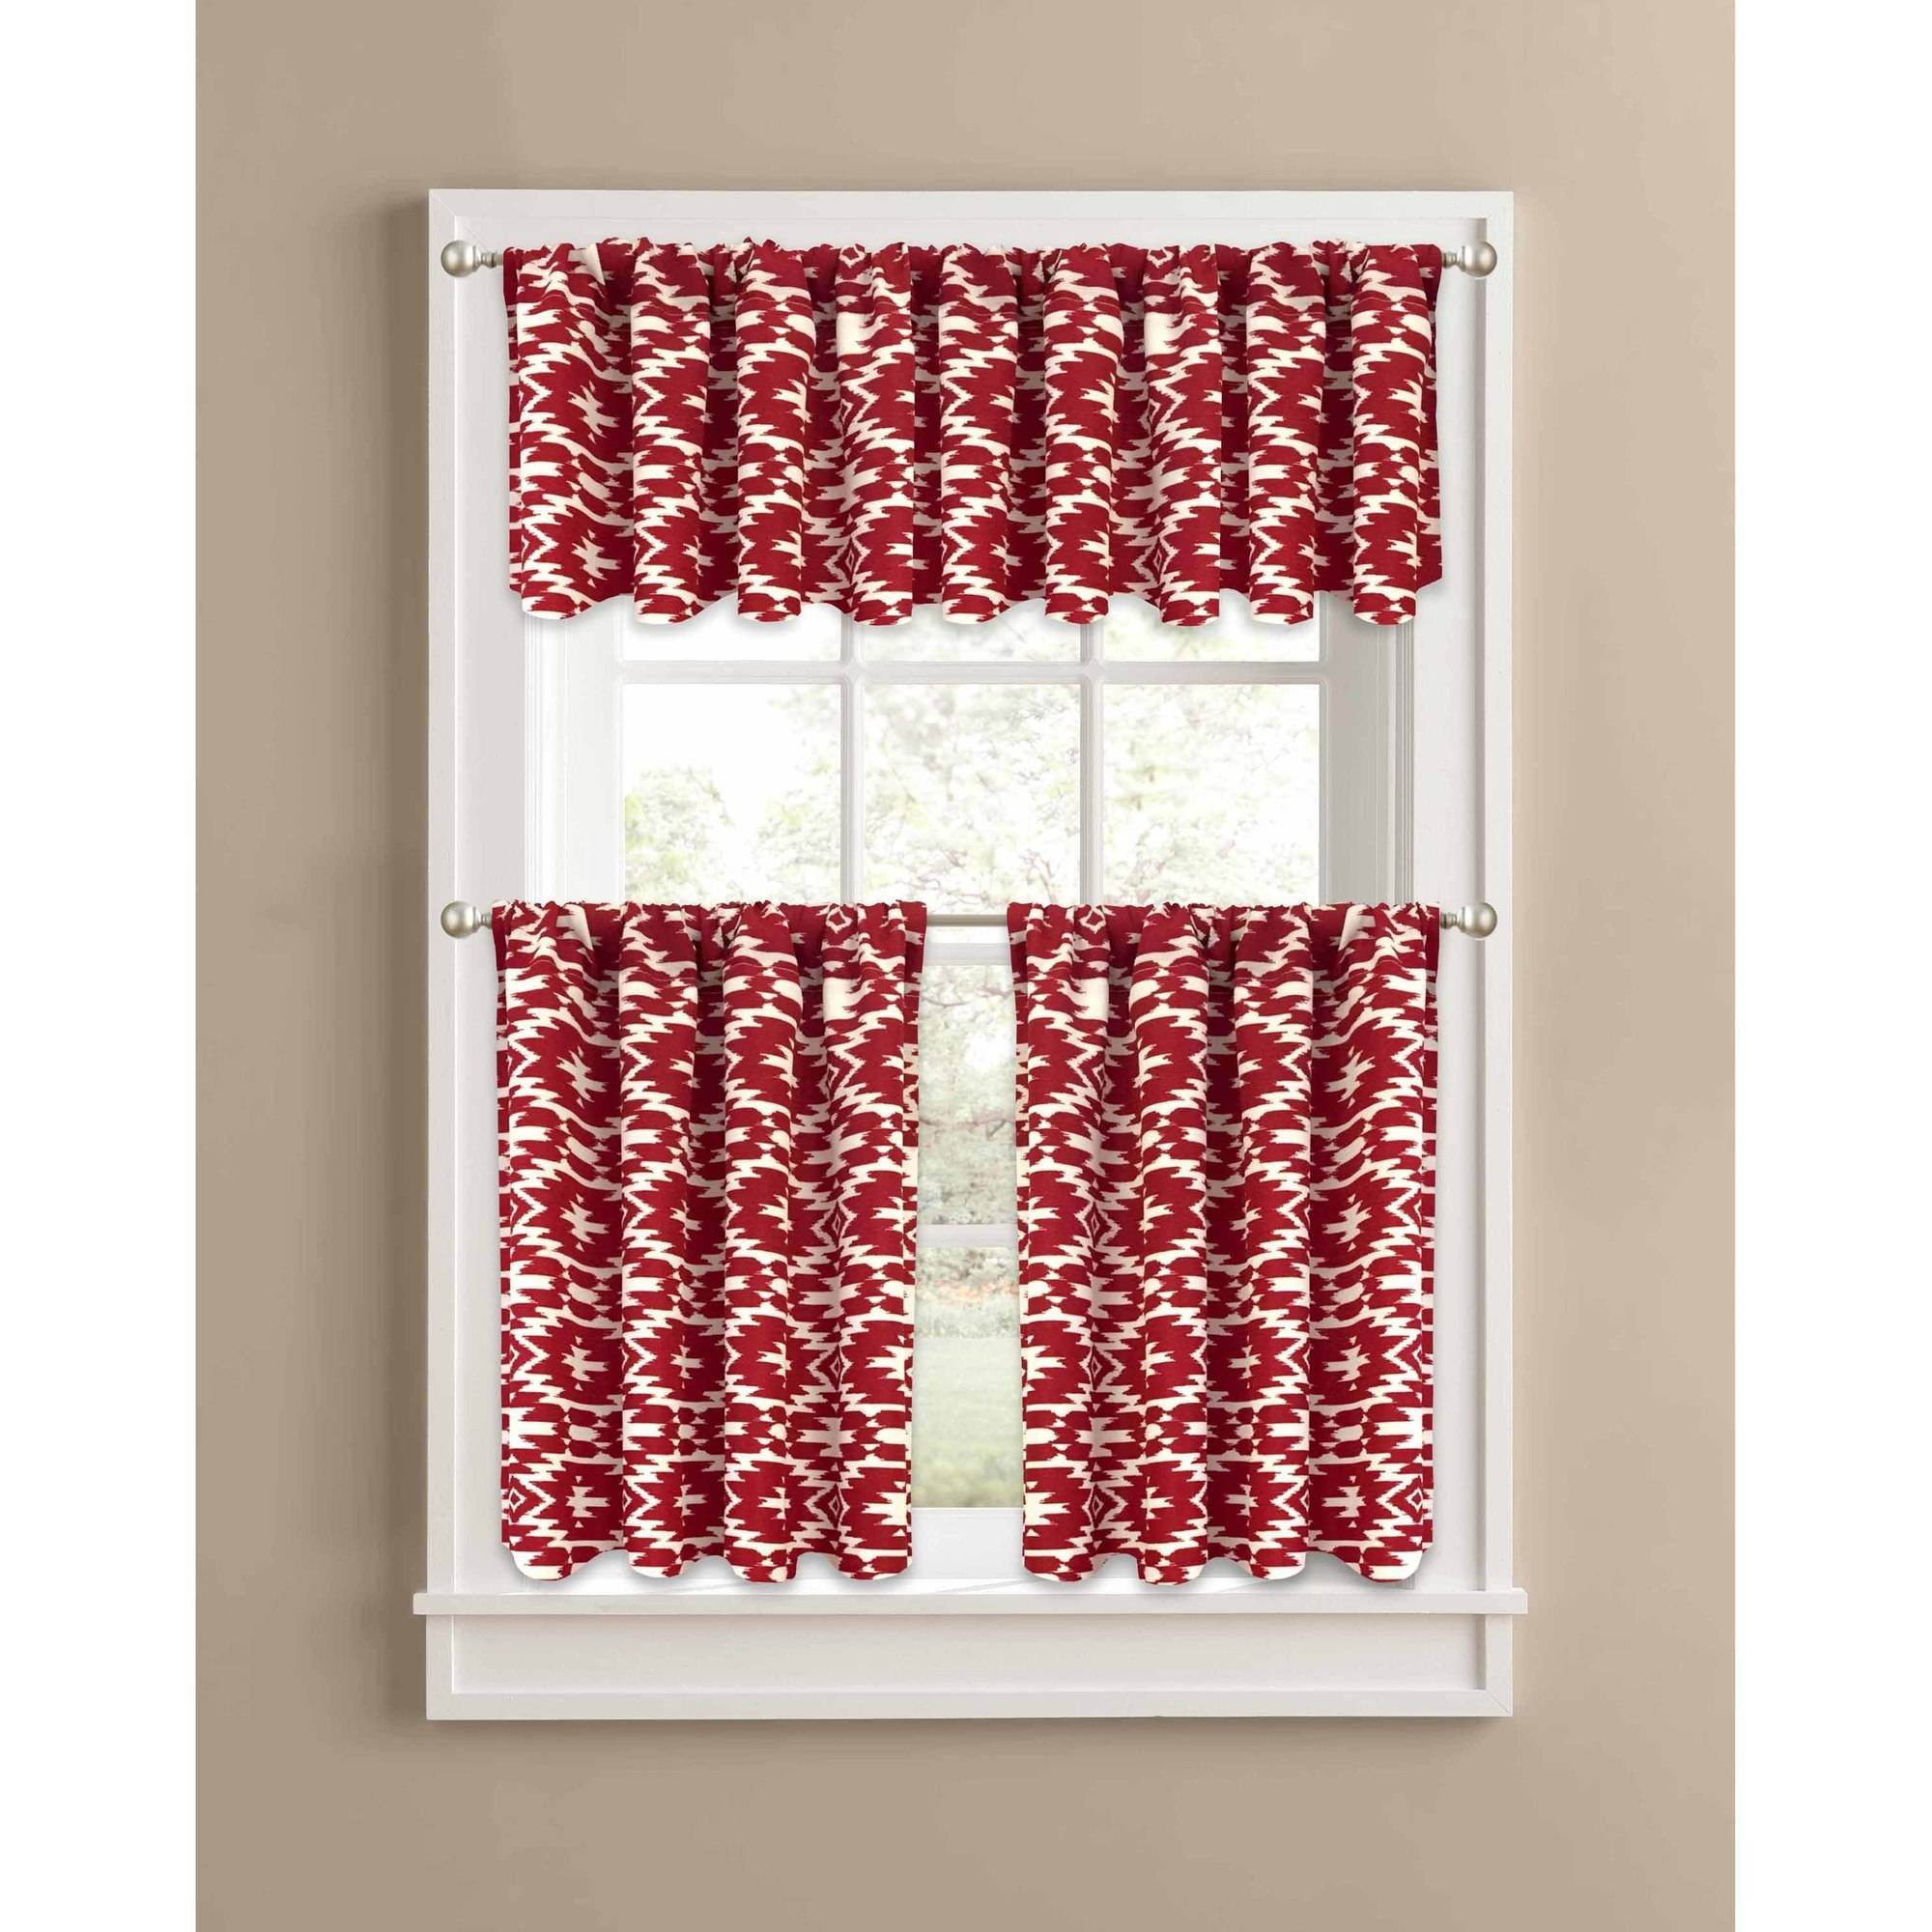 Red Valance Curtains For Kitchen
 Better Homes & Gardens Red Southwest Kitchen Curtains Set